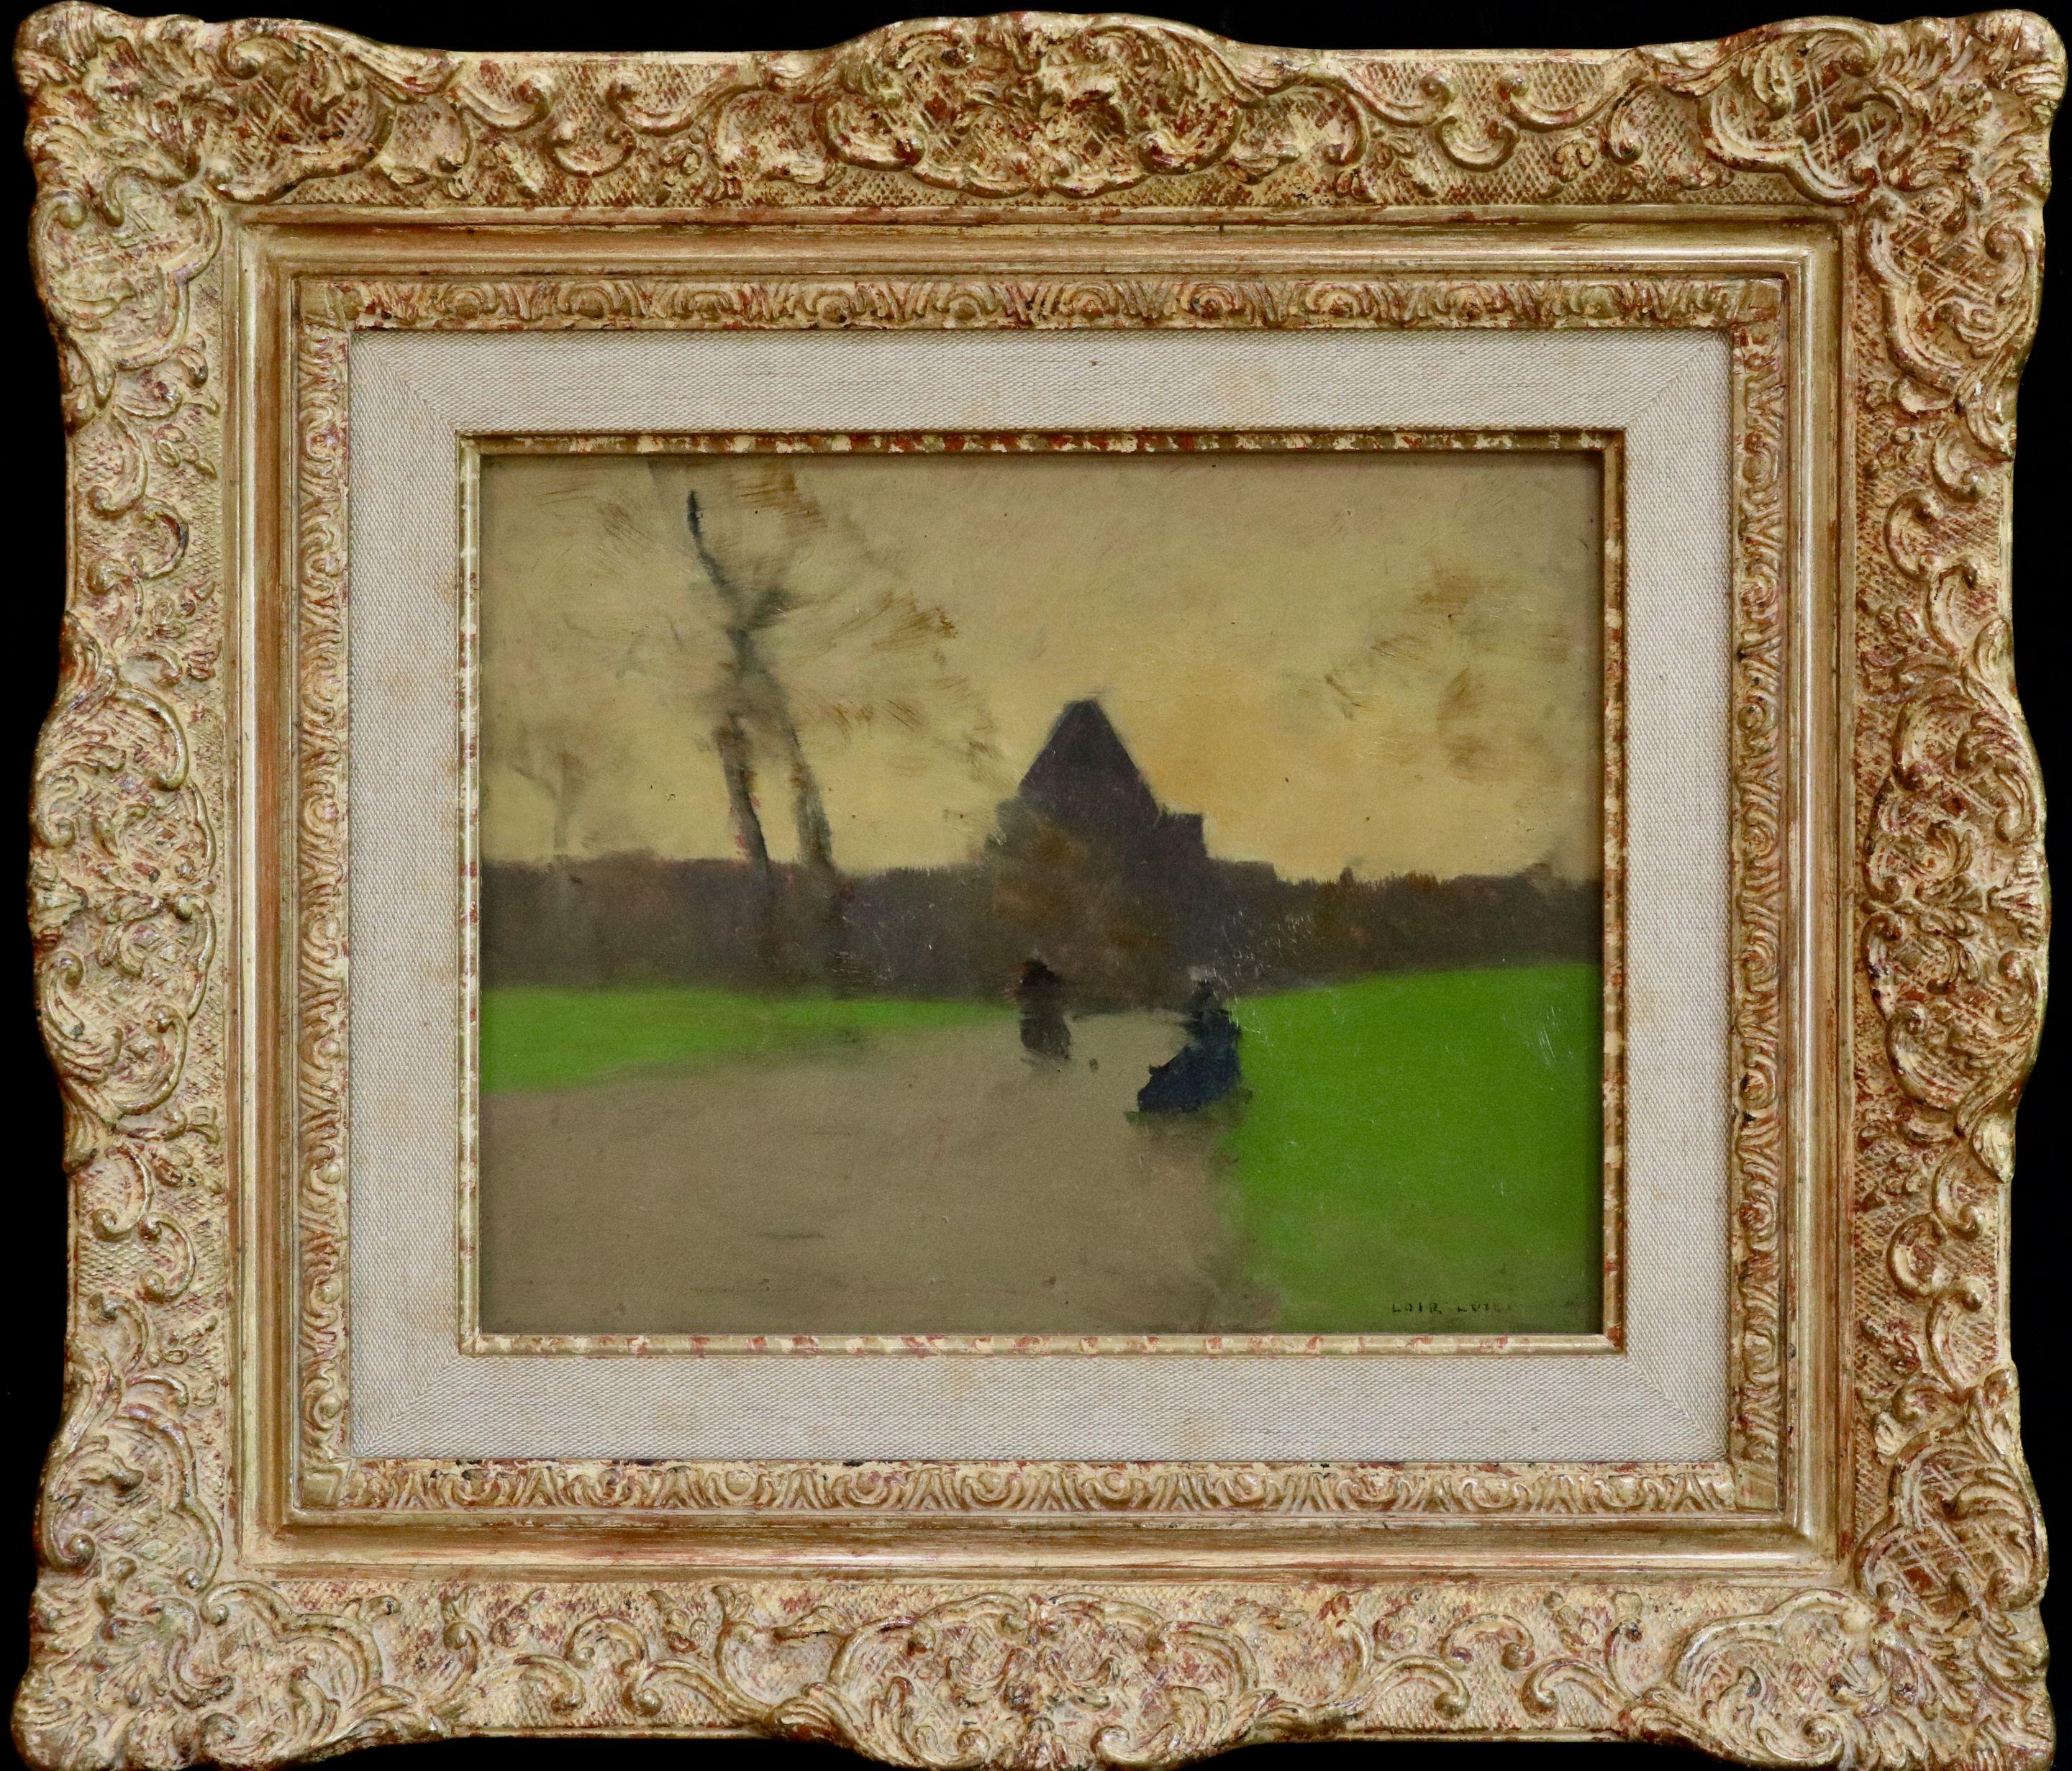 Oil on canvas circa 1890 by Luigi Loir depicting two figures on a path in front of a village at sunset. Signed lower right. Framed dimensions are 13.5 inches high by 15.5 inches wide.

Luigi Loir enrolled at the school of fine arts in Parma in 1853.